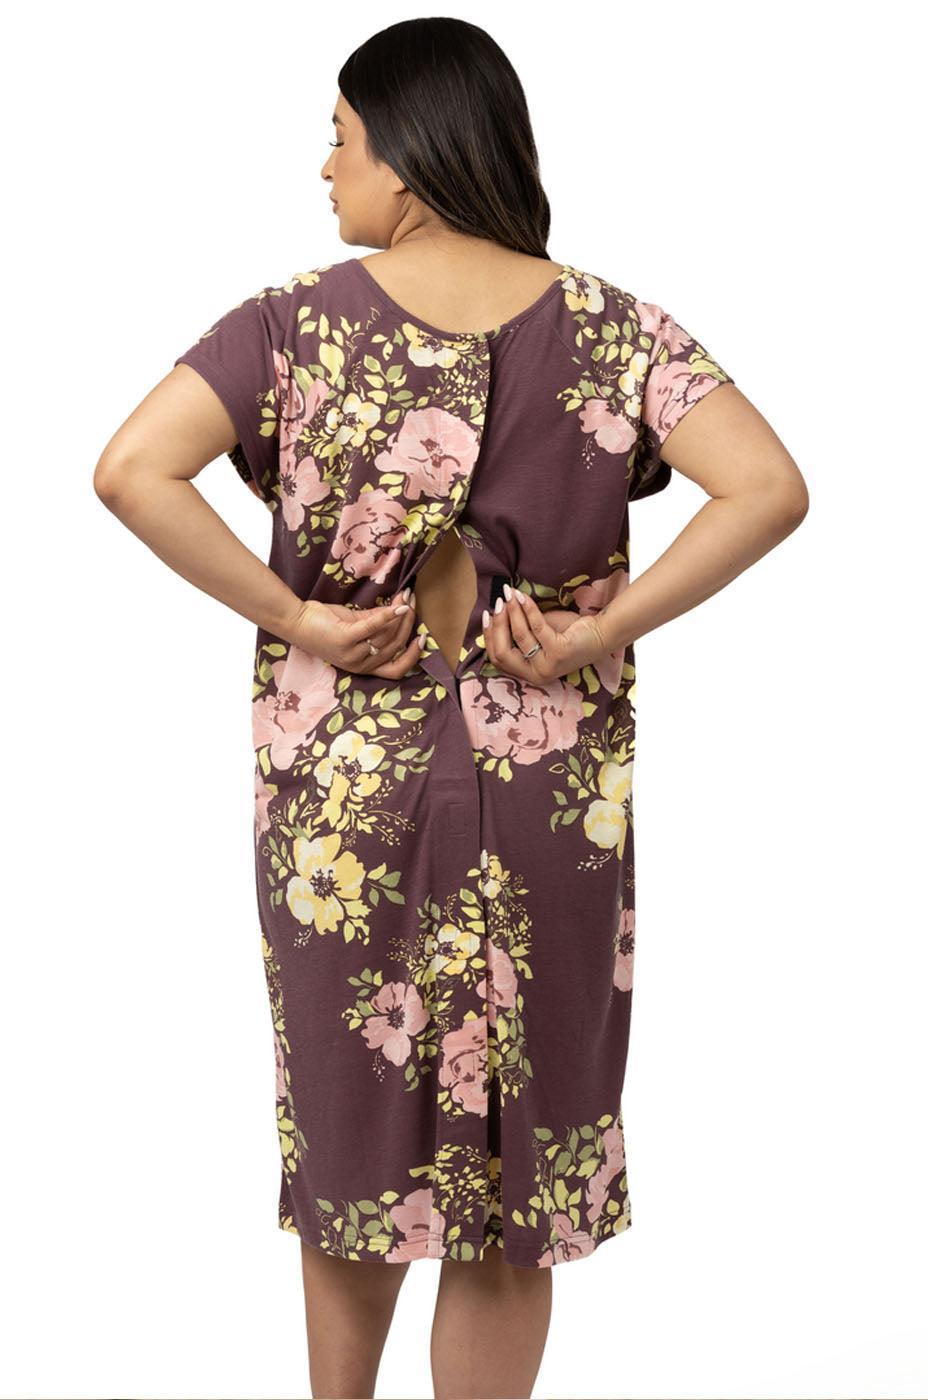 Universal Labor and Delivery Gown in Burgundy Plum Floral – Milk & Baby